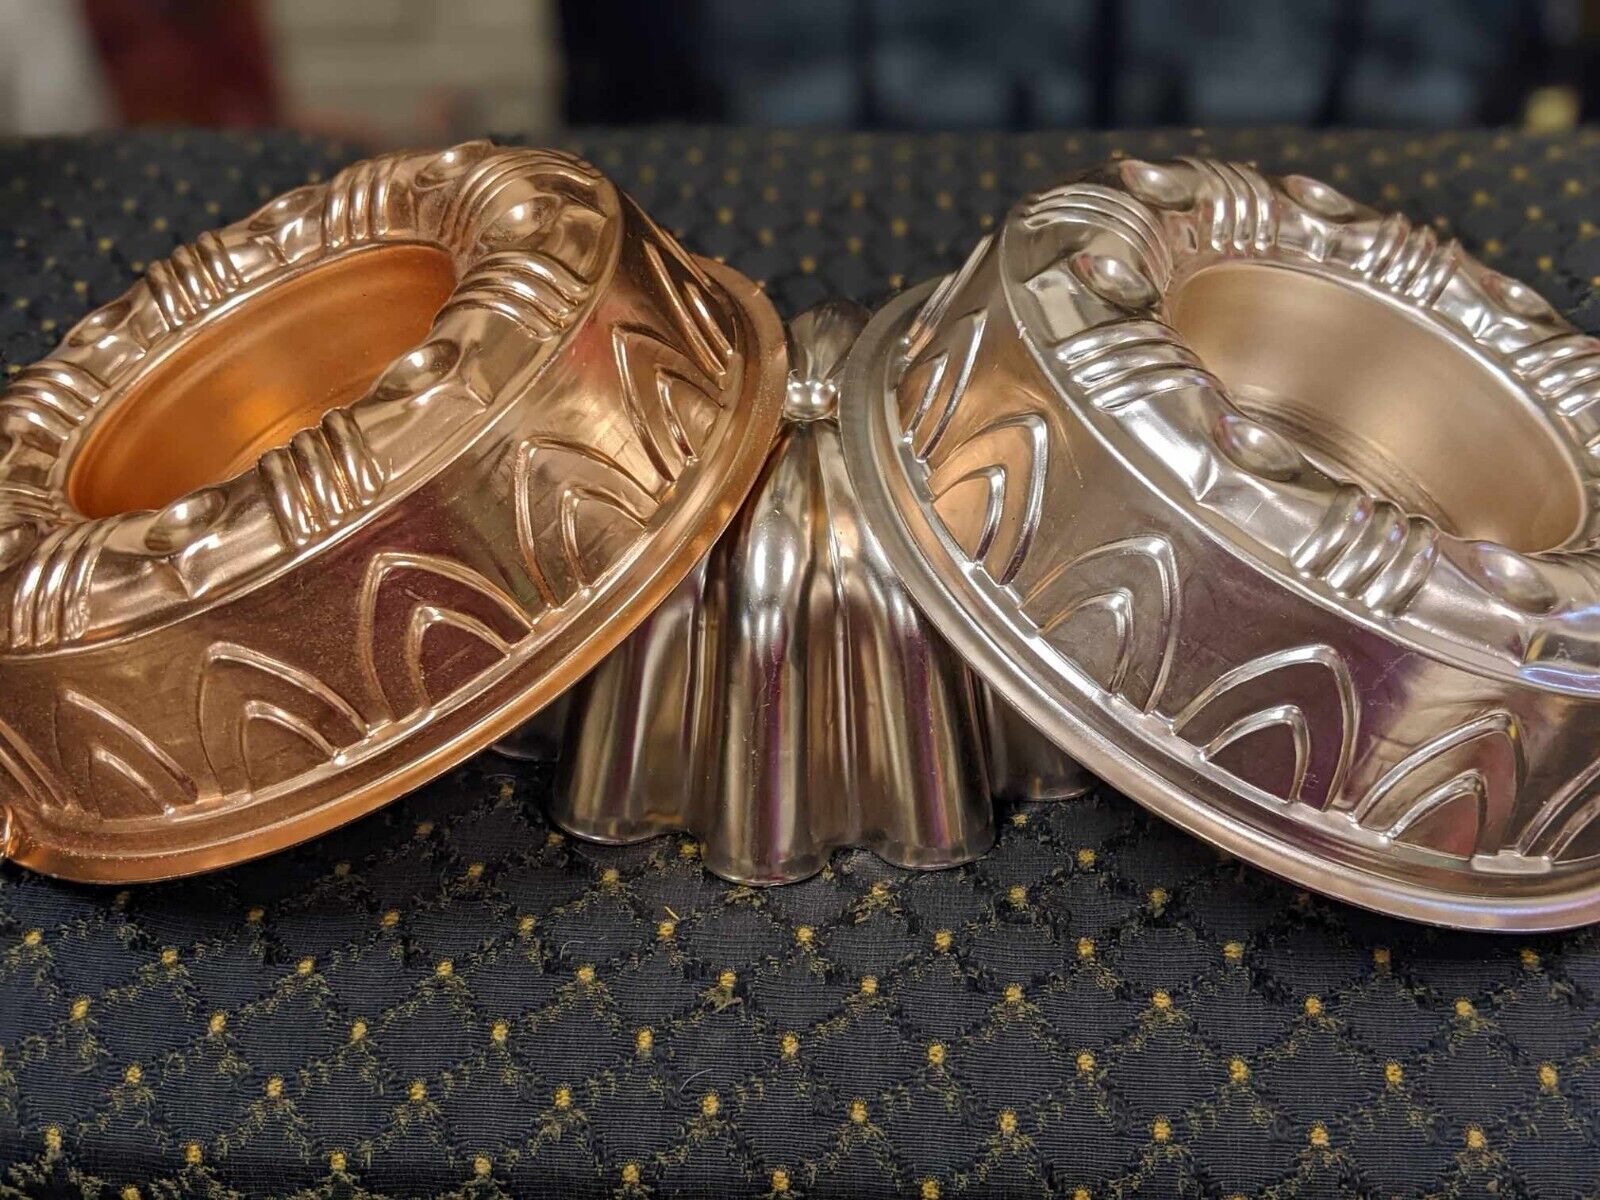 Vintage Metal Jello Mold Cake Pan/Wall Hanging - Copper Color set of 3